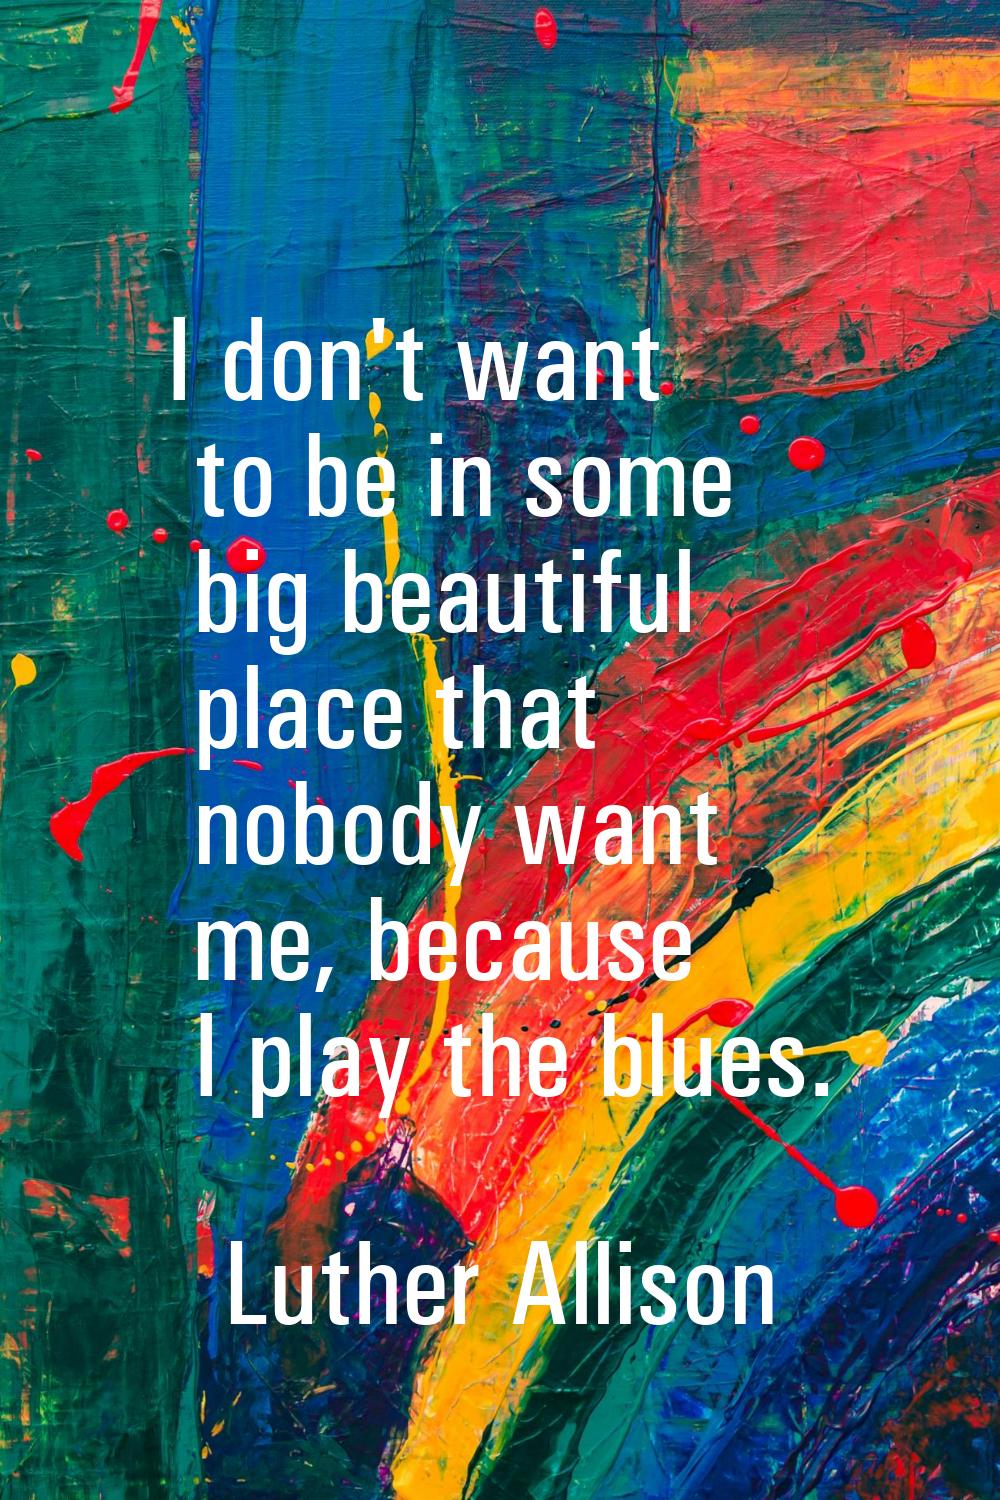 I don't want to be in some big beautiful place that nobody want me, because I play the blues.